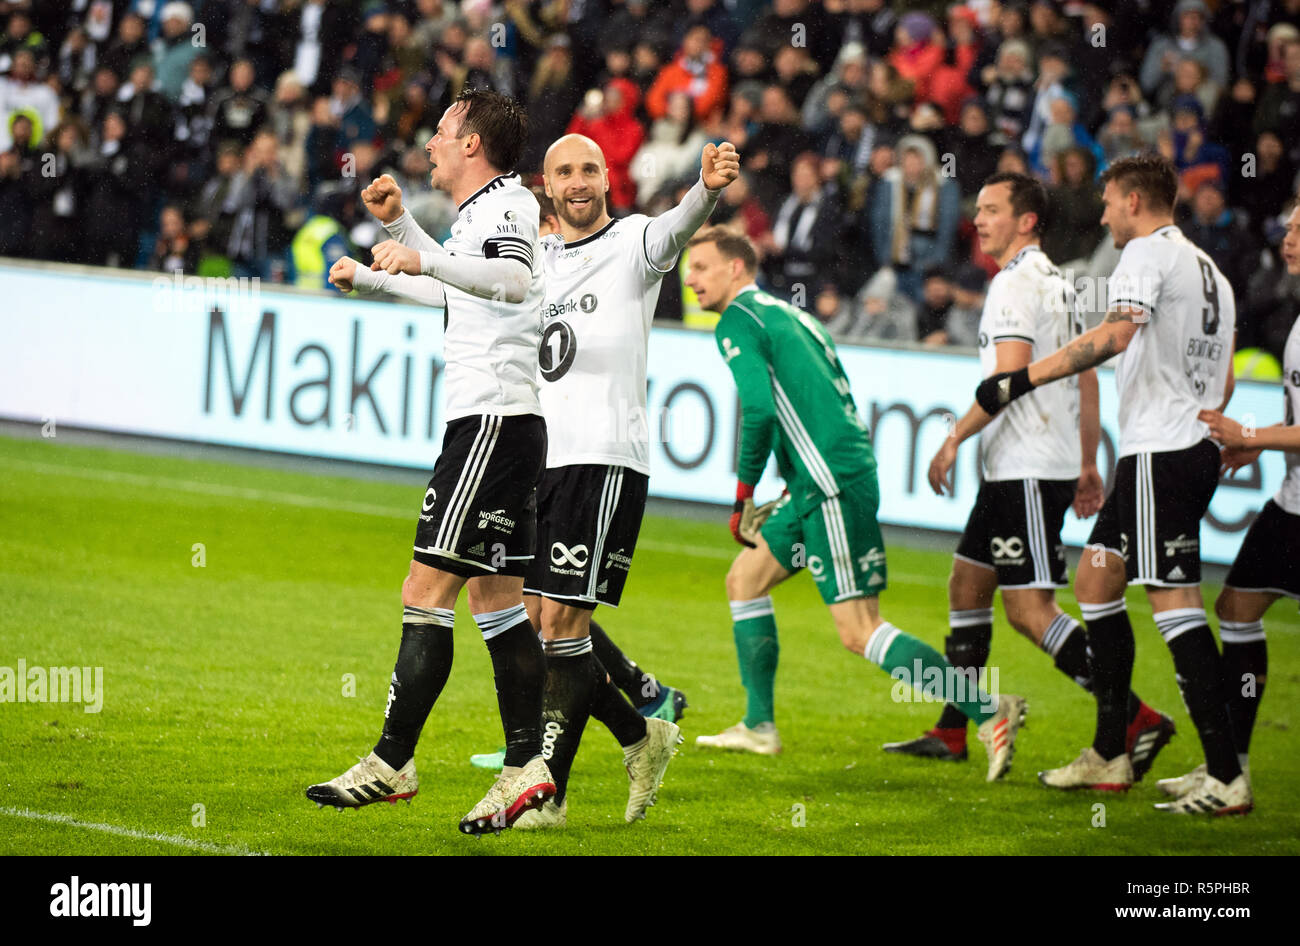 Norway, Oslo. 2nd Dec 2018. Tore Reginiussen and Mike Jensen of Rosenborg celebrate after winning the 2018 Norwegian Cup Final against Strømsgodset at Ullevaal Stadion in Oslo. (Photo credit: Gonzales Photo - Jan-Erik Eriksen). Credit: Gonzales Photo/Alamy Live News Stock Photo